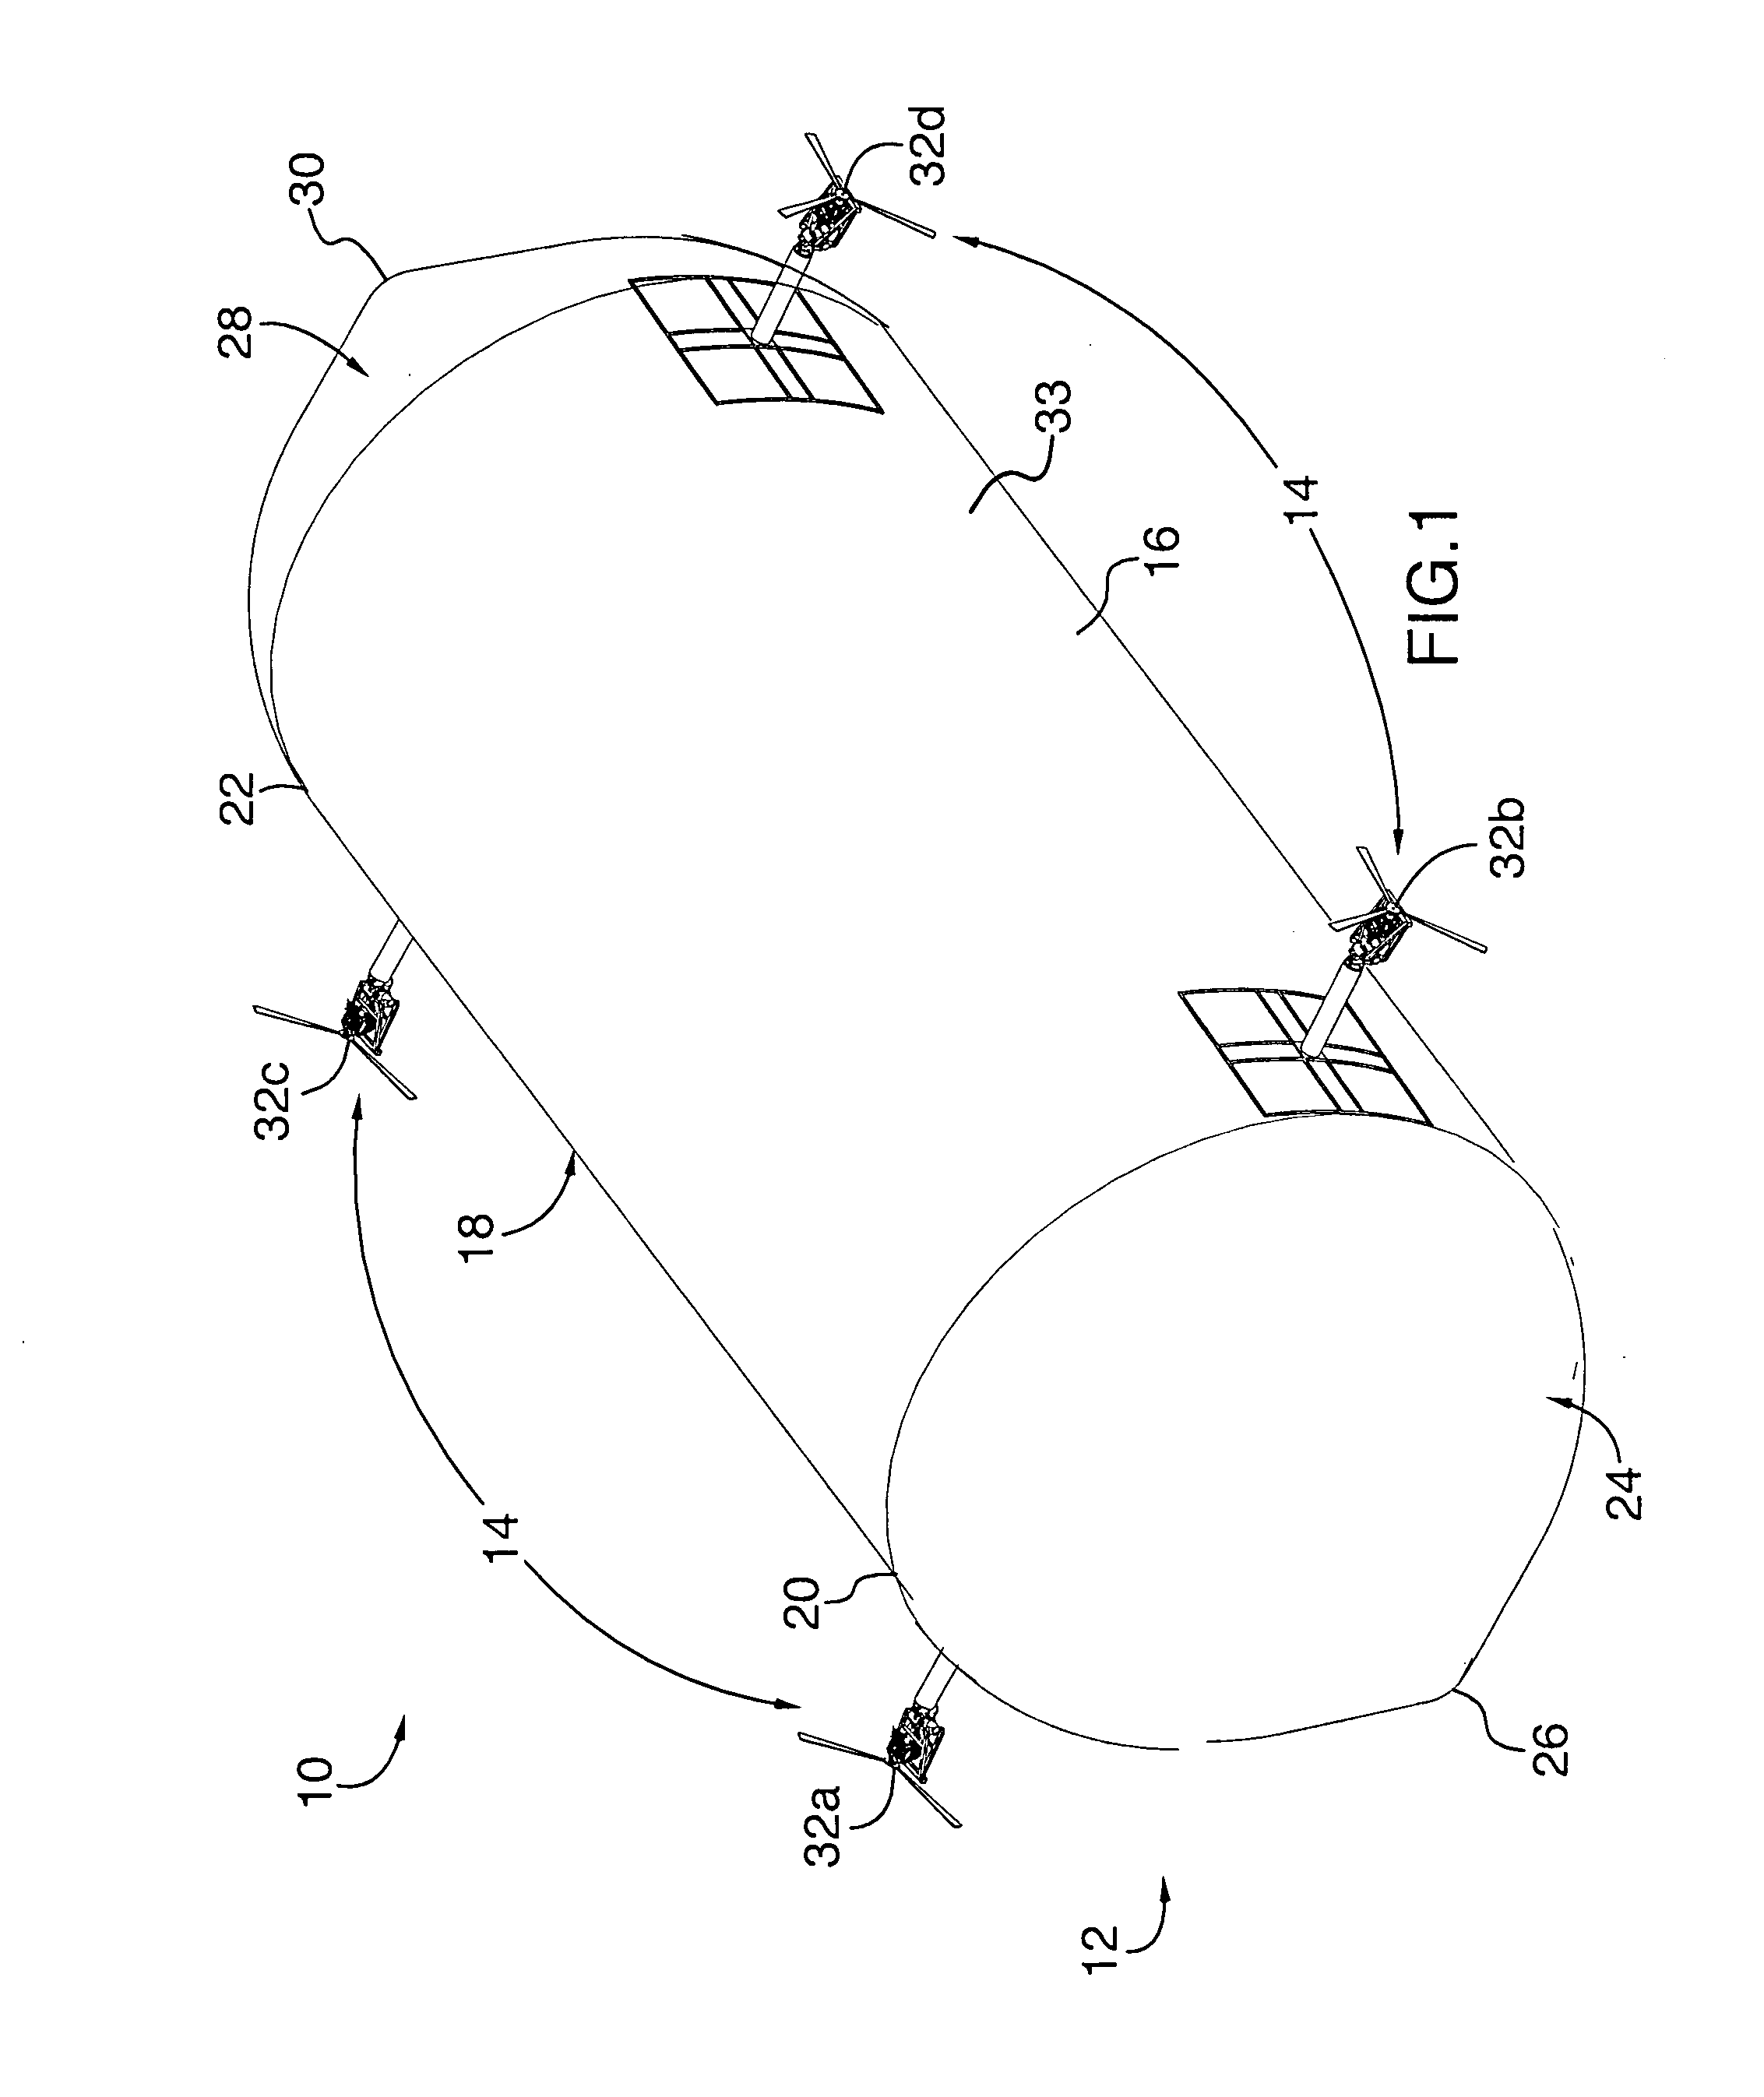 Propulsion and steering system for an airship